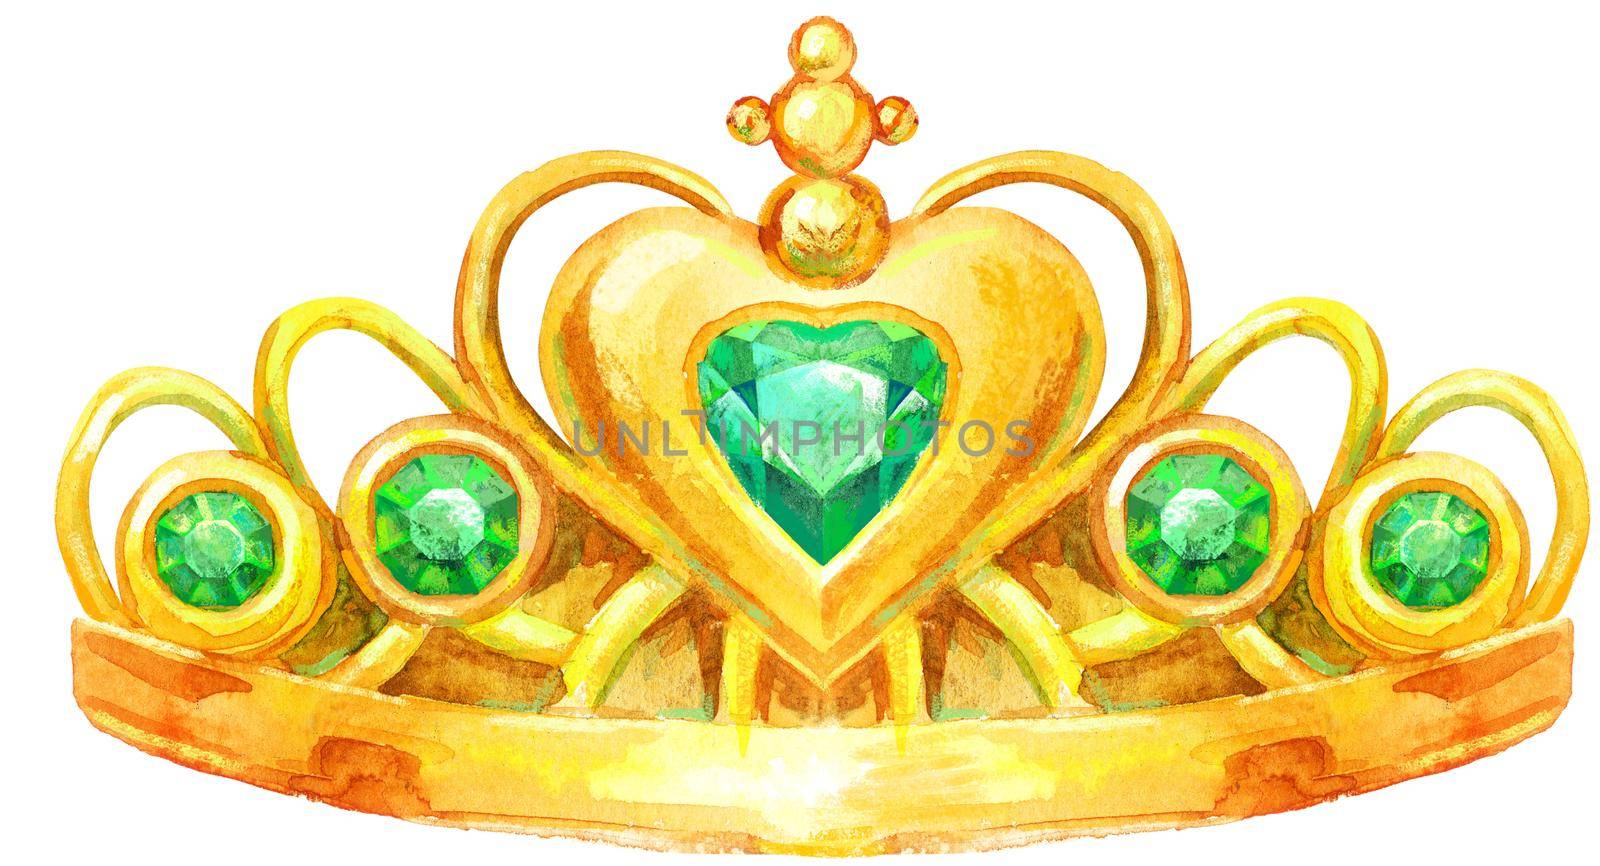 Watercolor Gold Crown with precious stones and emerald